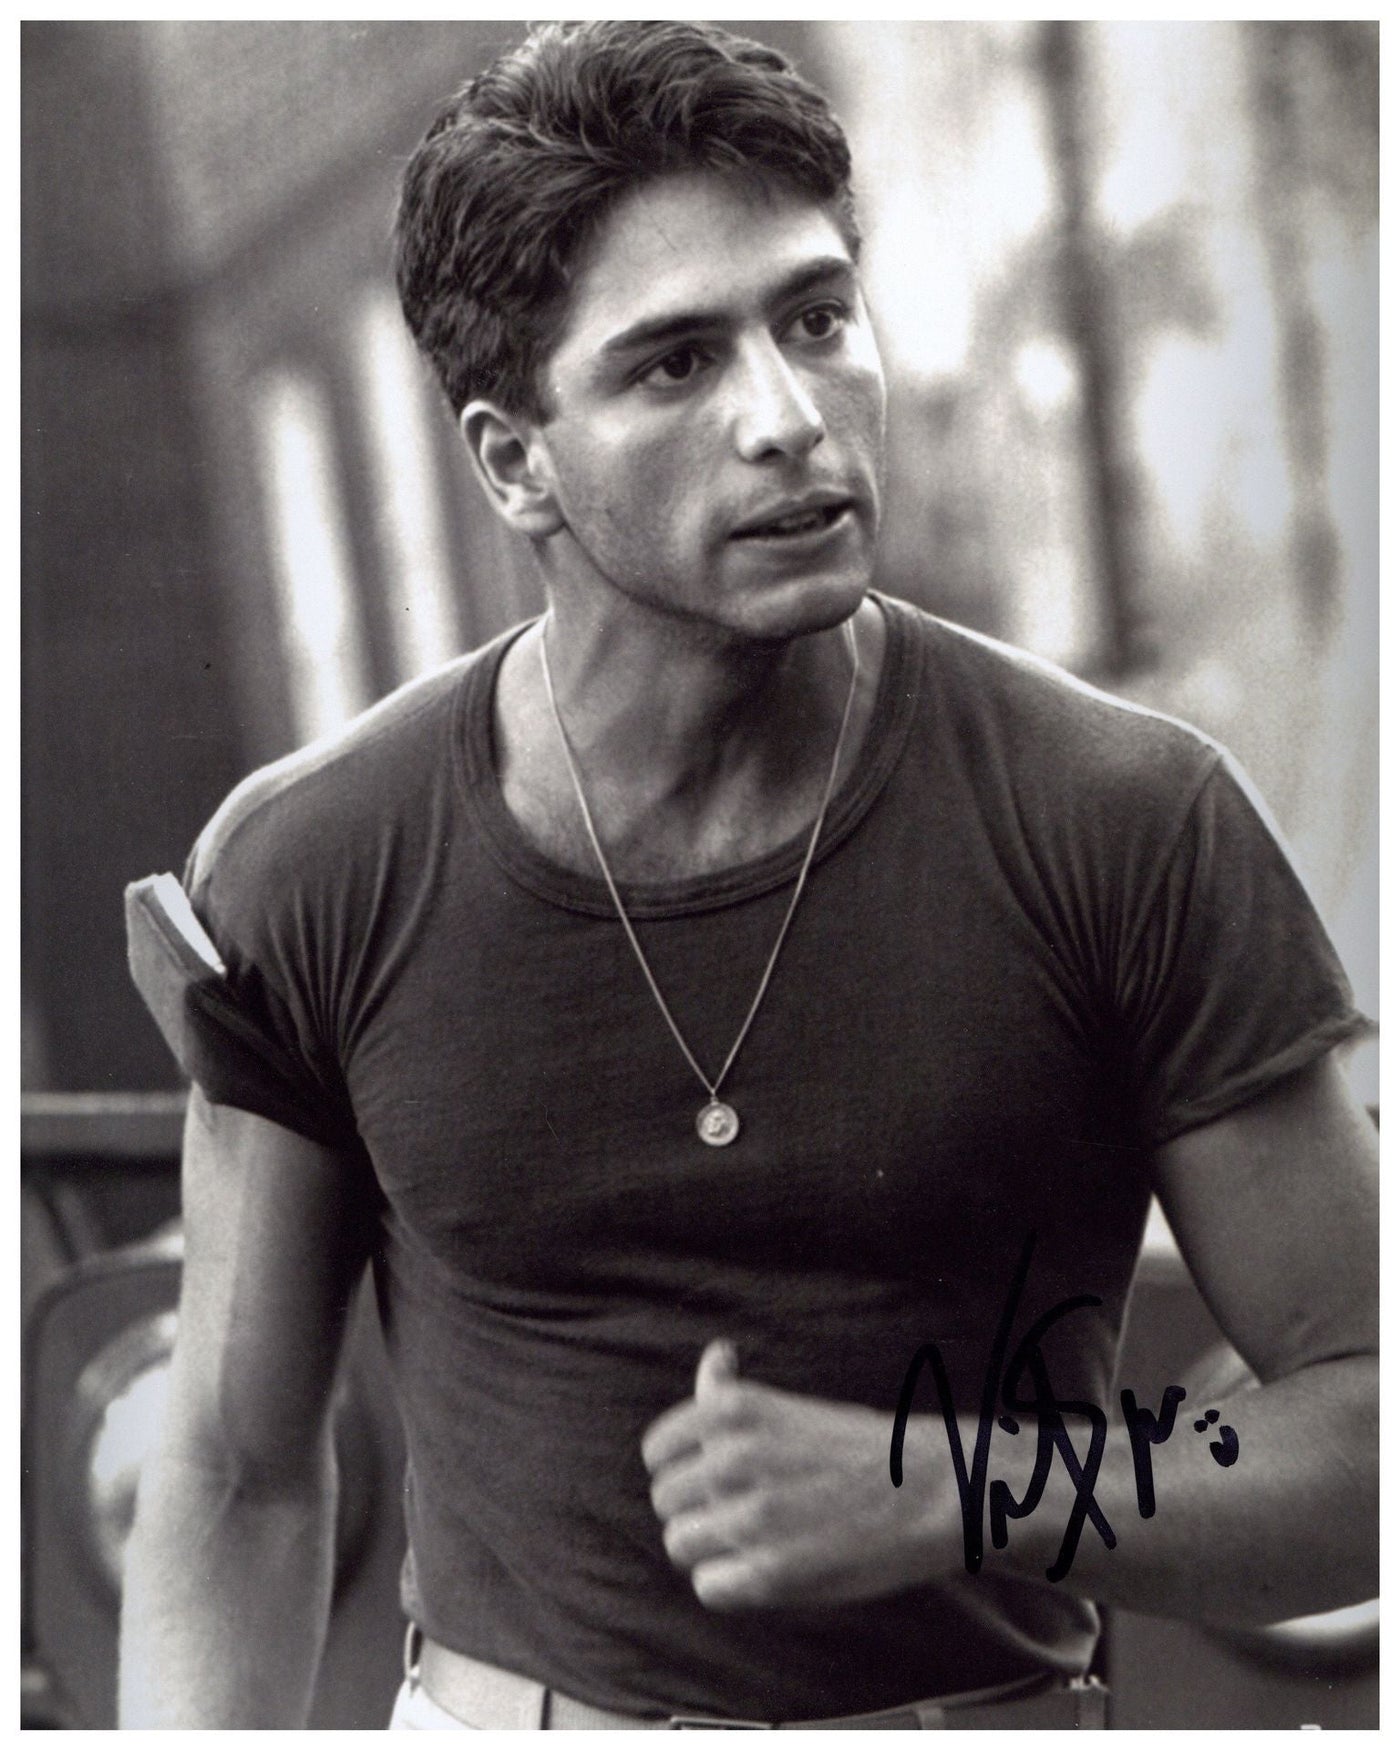 VINCENT SPANO SIGNED 8X10 PHOTO MARIA'S LOVER AUTOGRAPHED ACOA